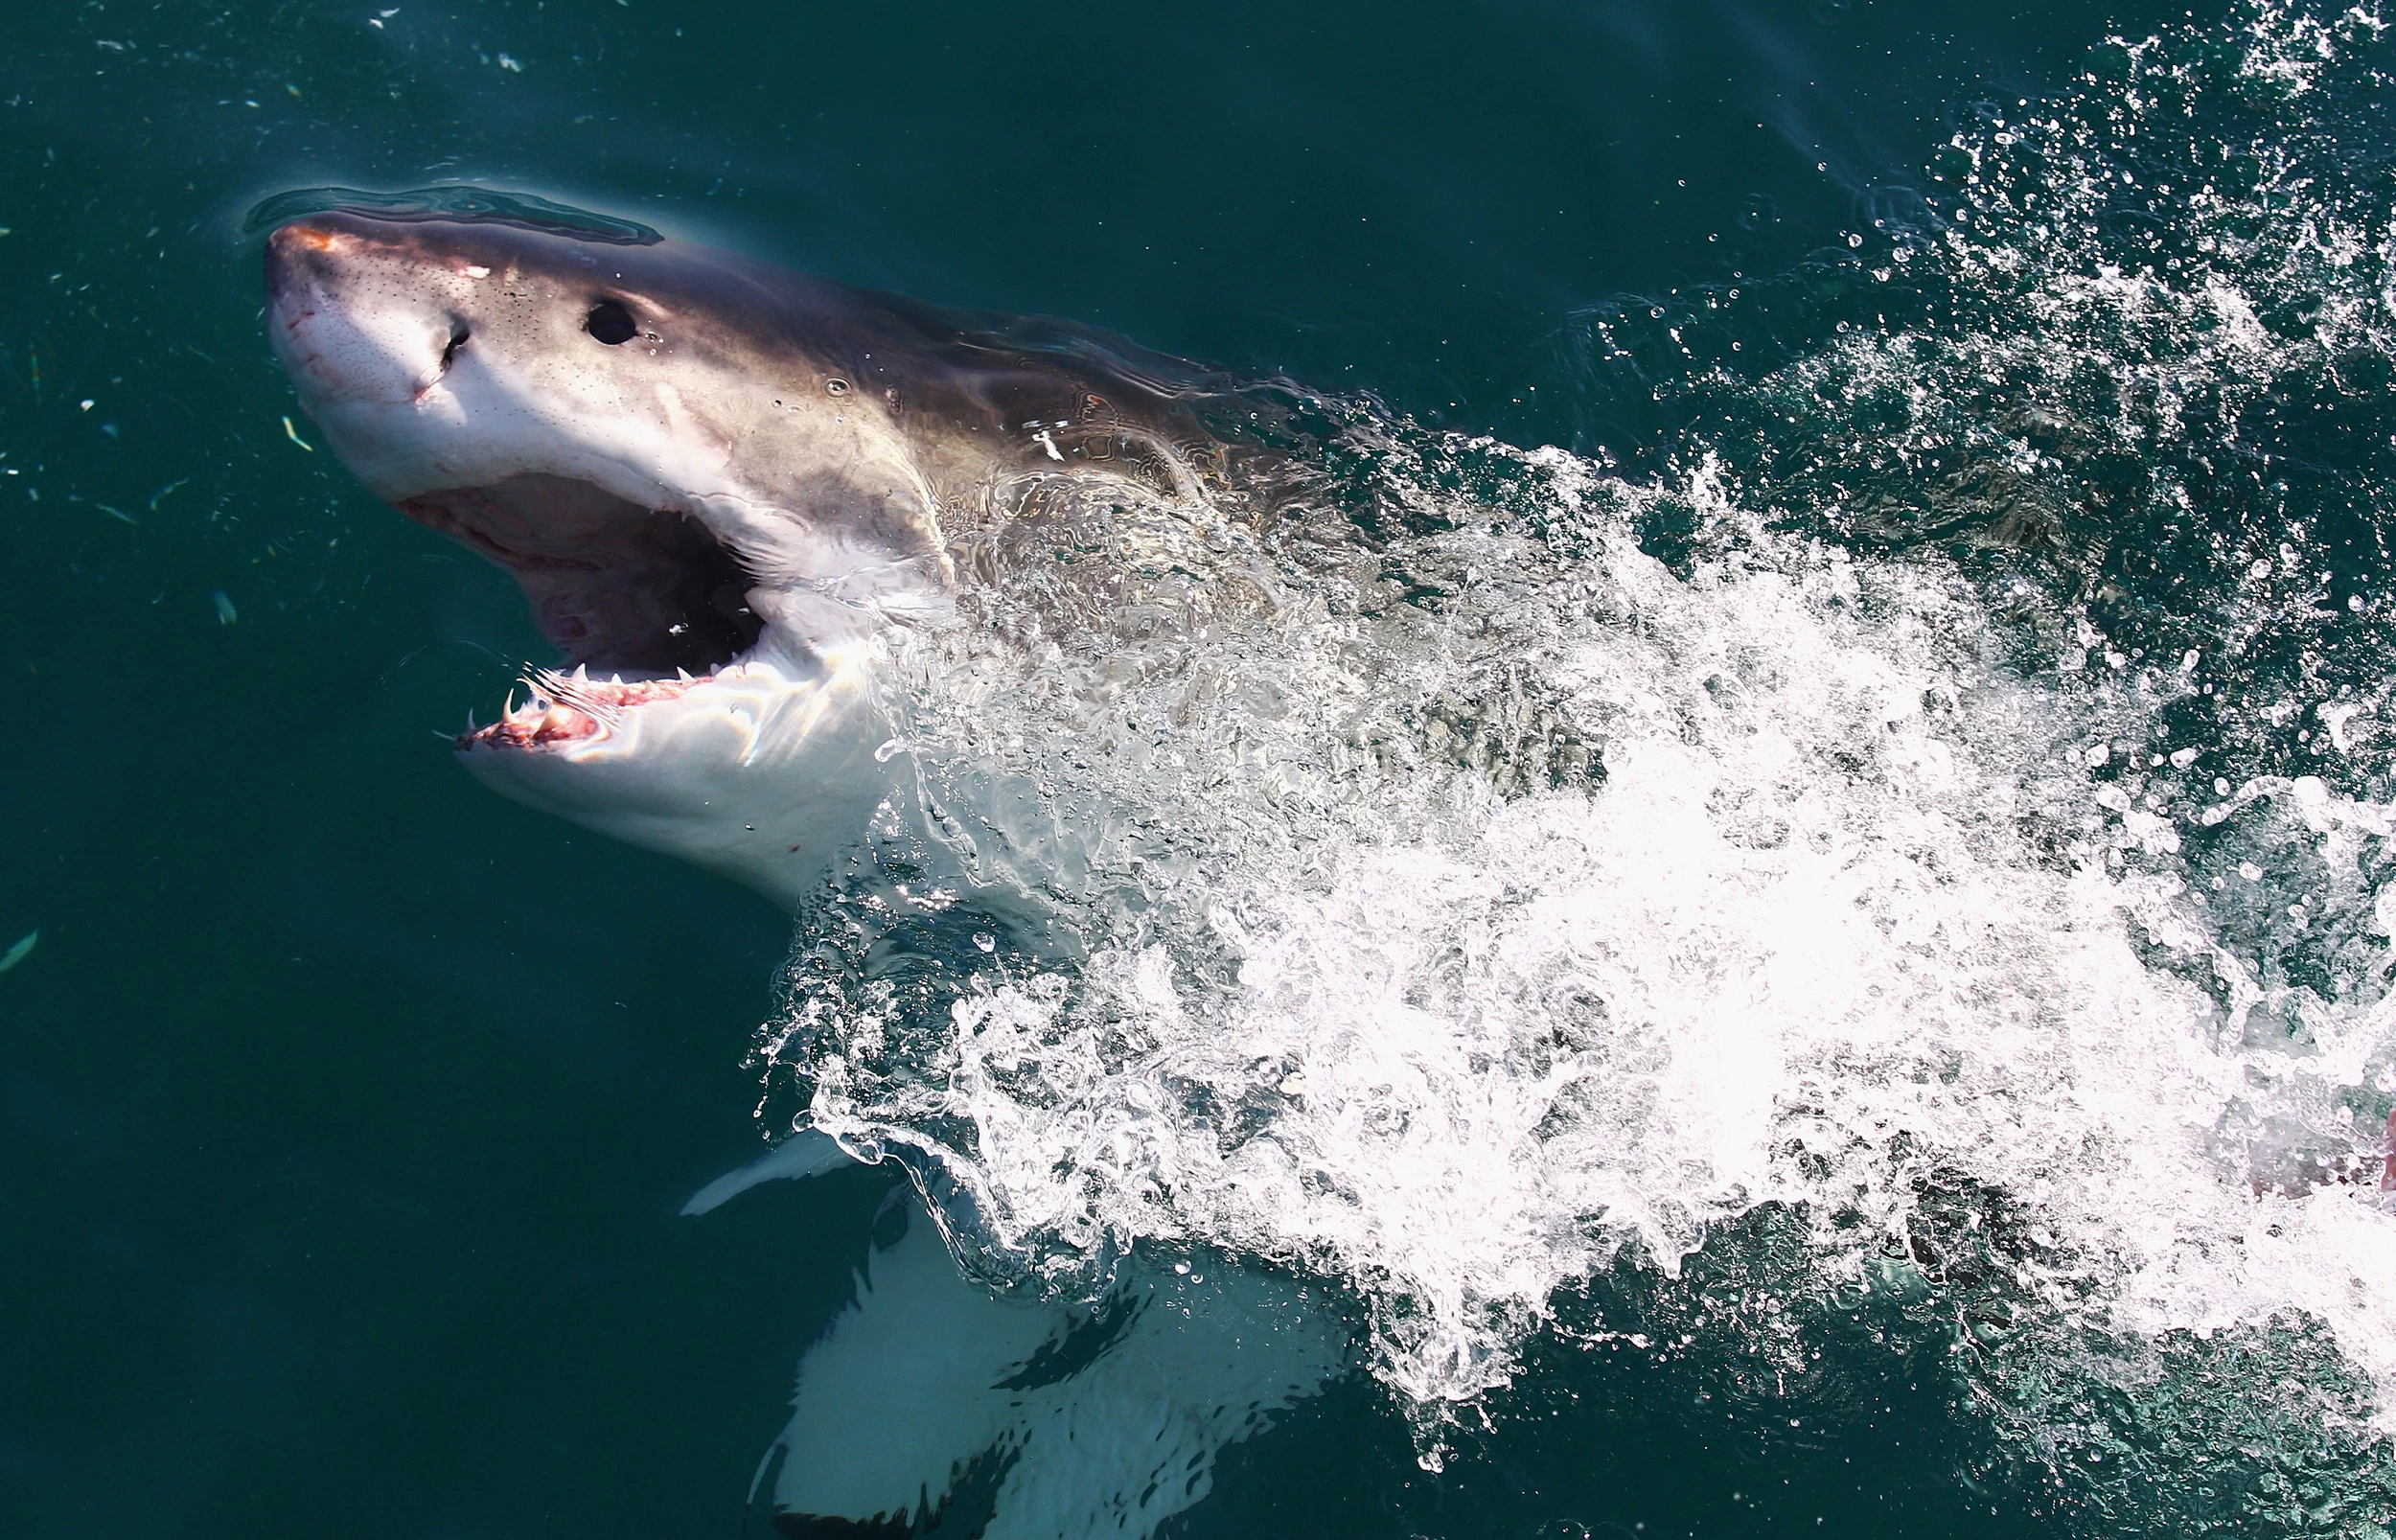 Great white shark swimming off Jersey Shore now appears headed further out  to sea